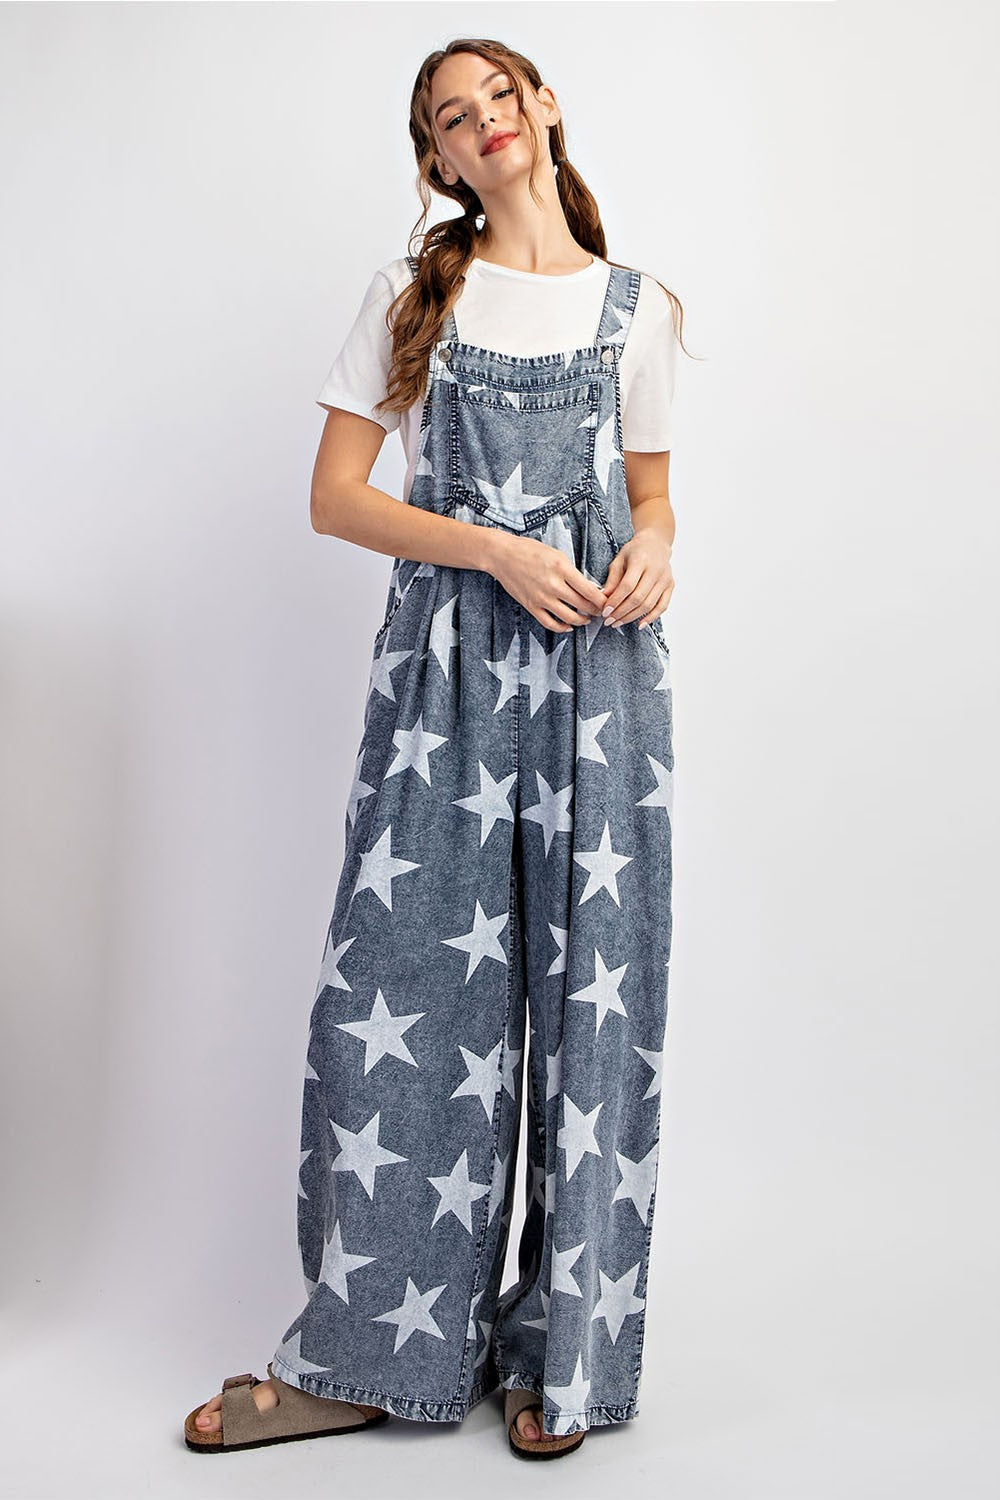 Mineral Wash Star Overalls